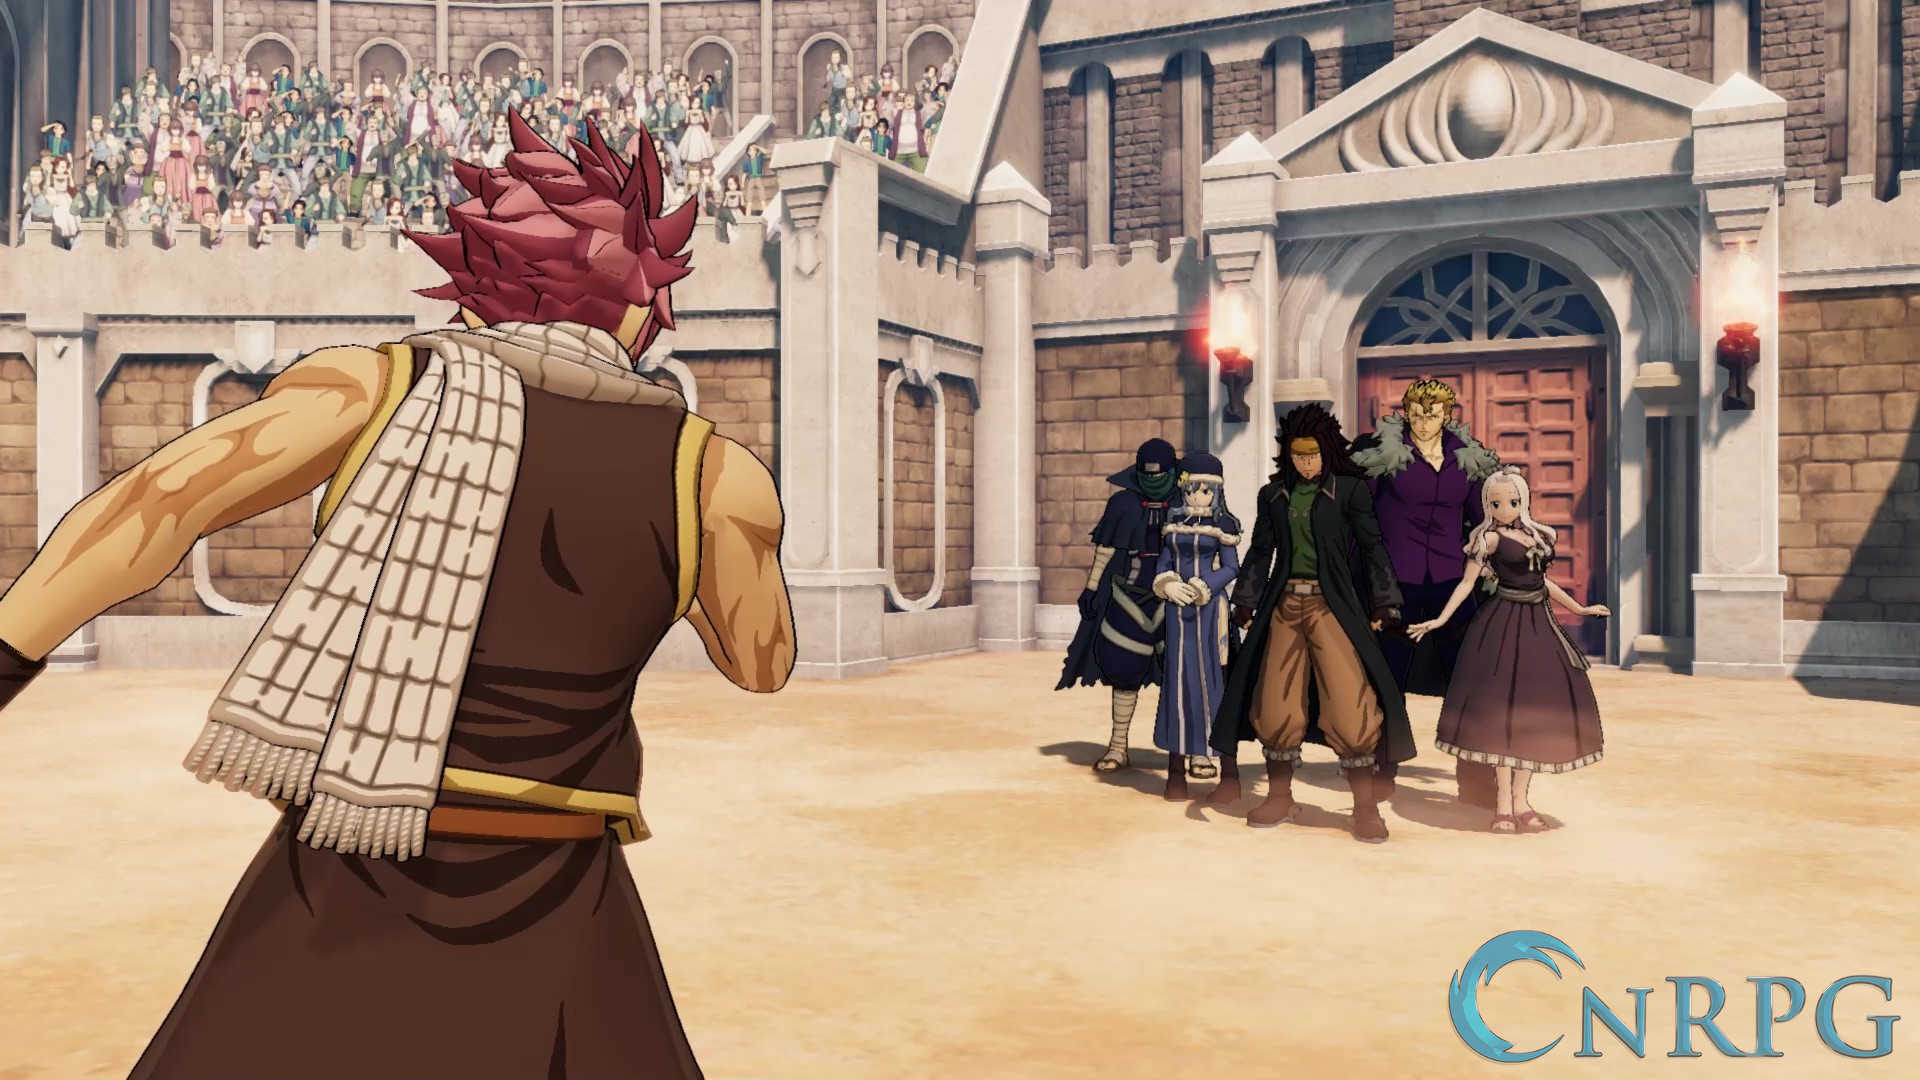 Gamepub to launch Fairy Tail mobile game in Korea - GamerBraves